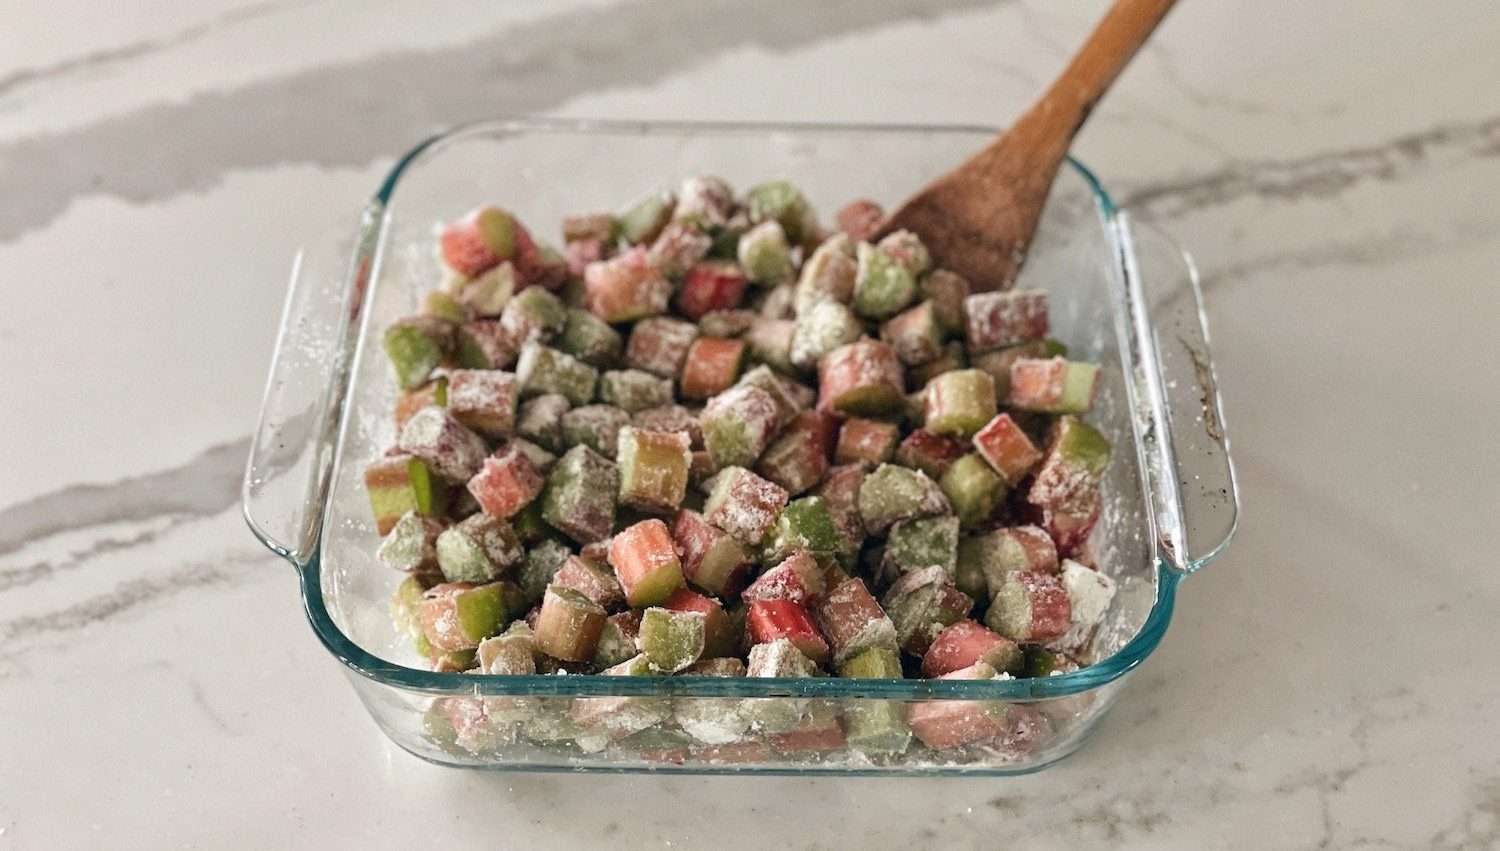 Chopped rhubarb mixed with sugar and flour in a square baking dish